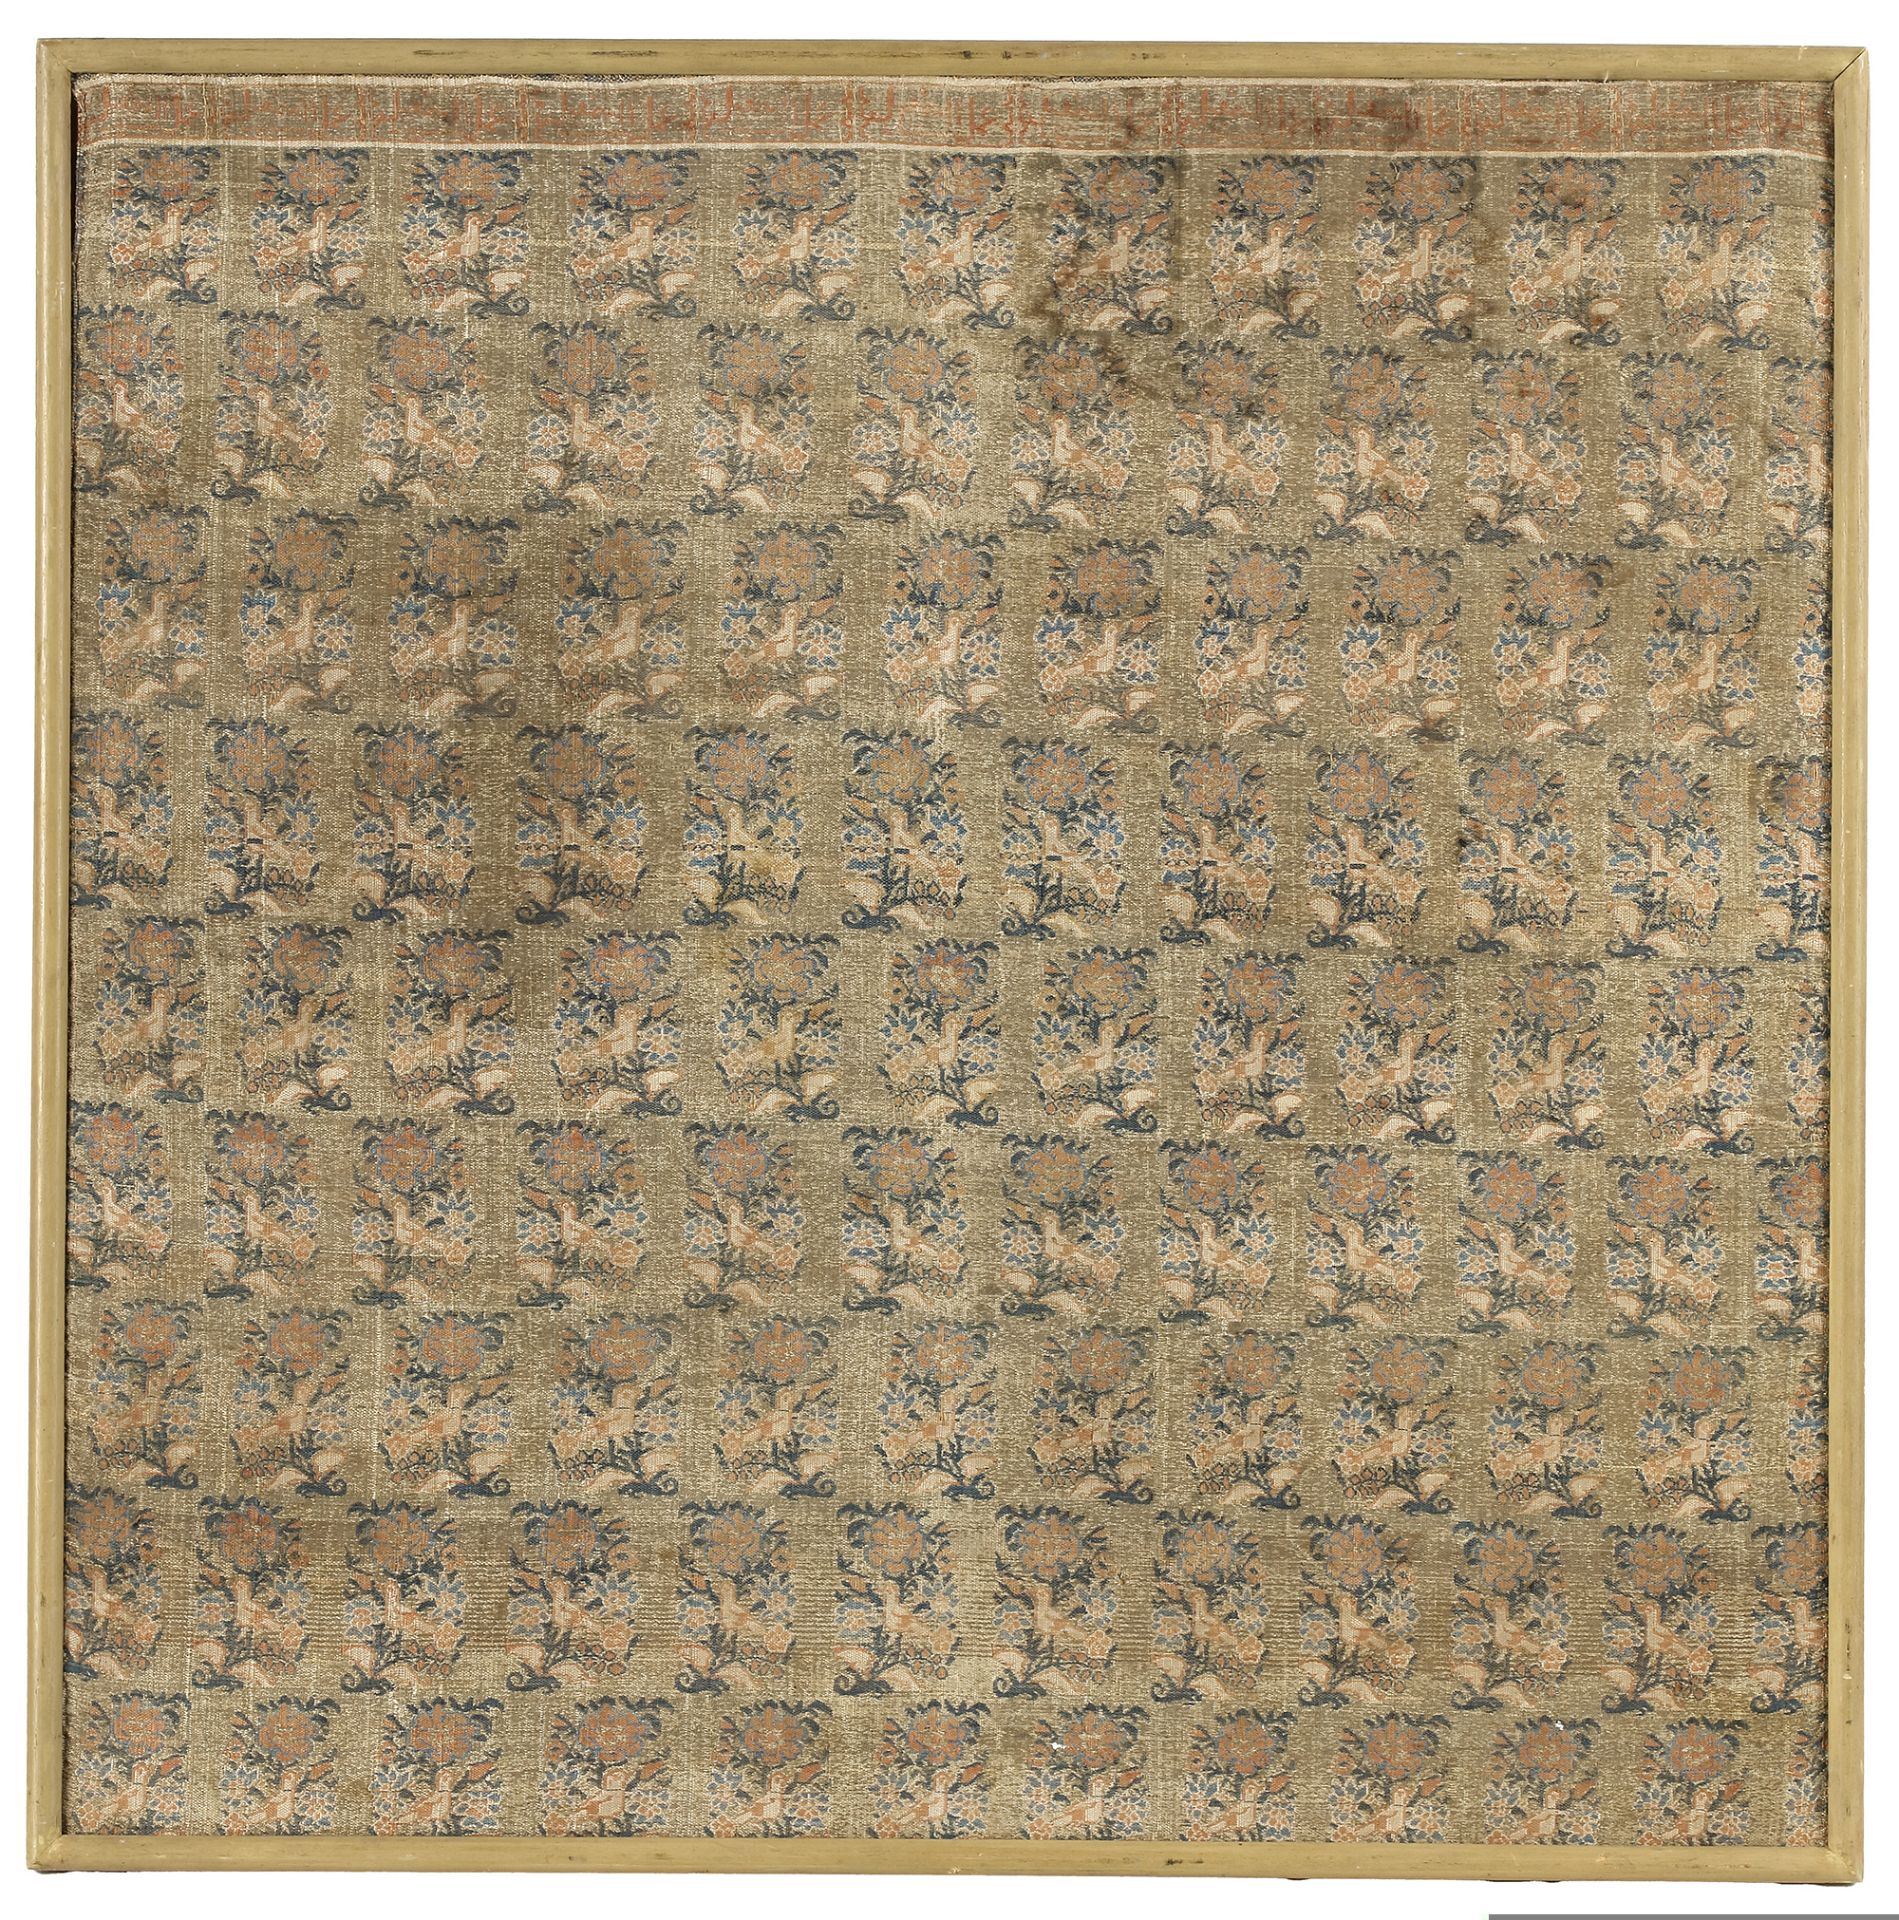 A SAFAVID SILK AND METAL TEXTILE, WITH ARABIC INSCRIPTIONS, 17TH CENTURY